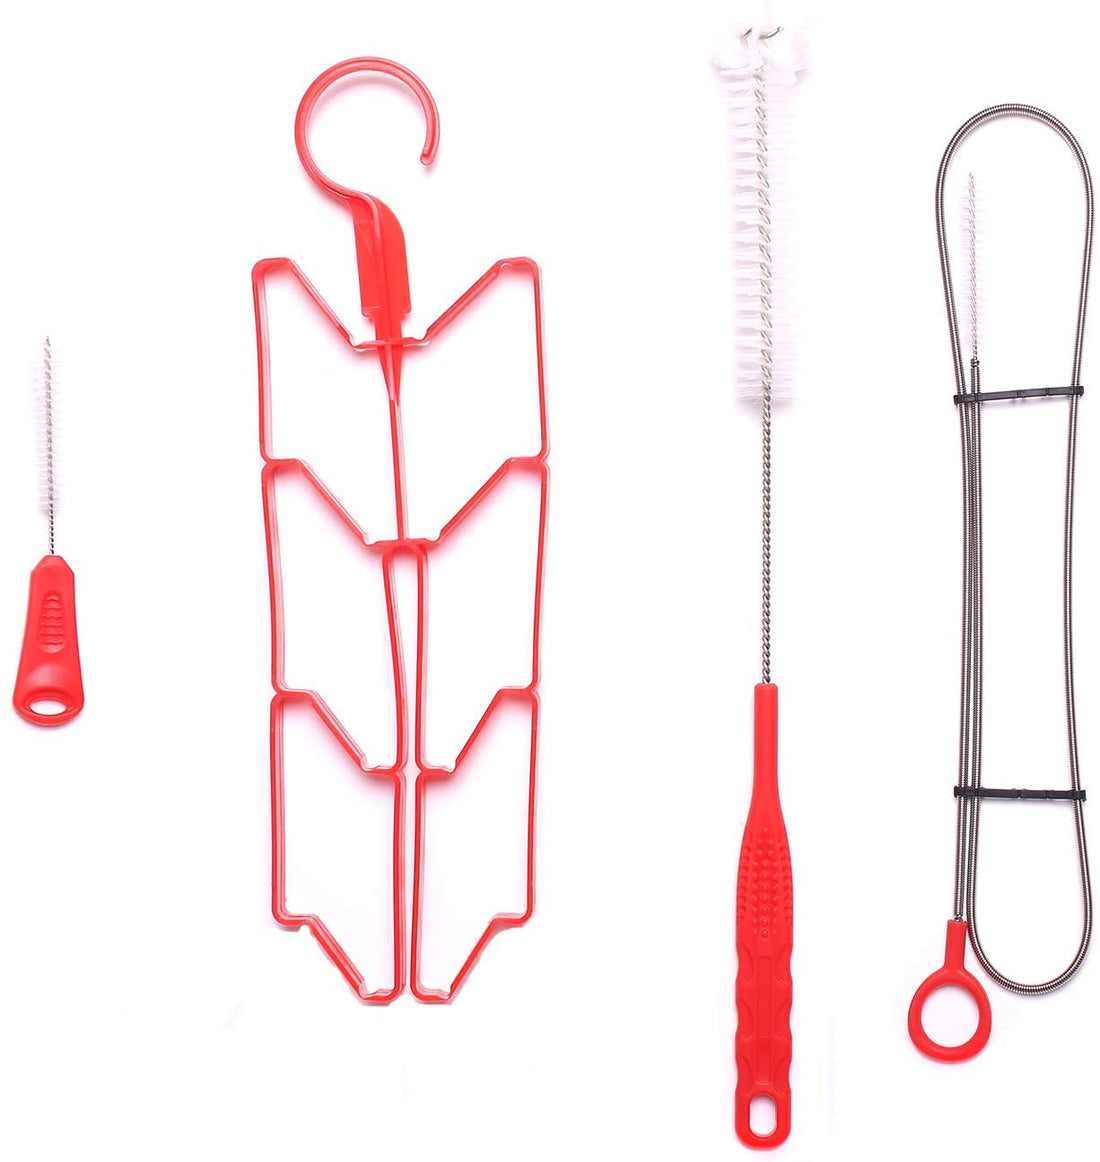 4 in 1 Cleaning Kit, Red Color